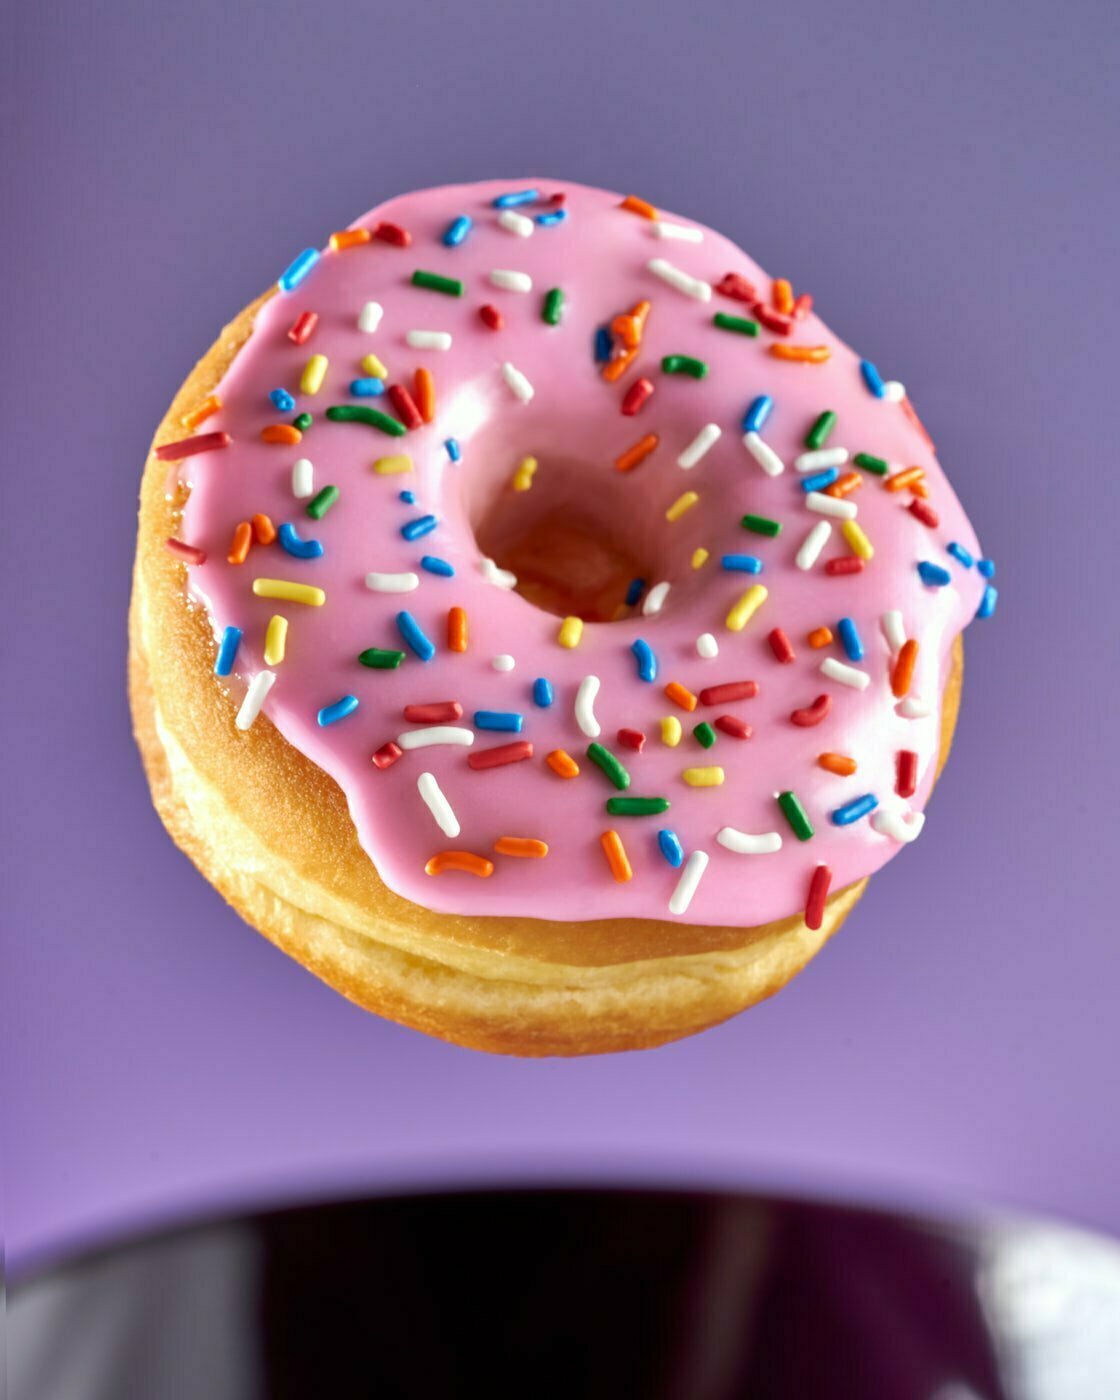 A pink raised donut with sprinkles floating above a purple mug against a purple background.